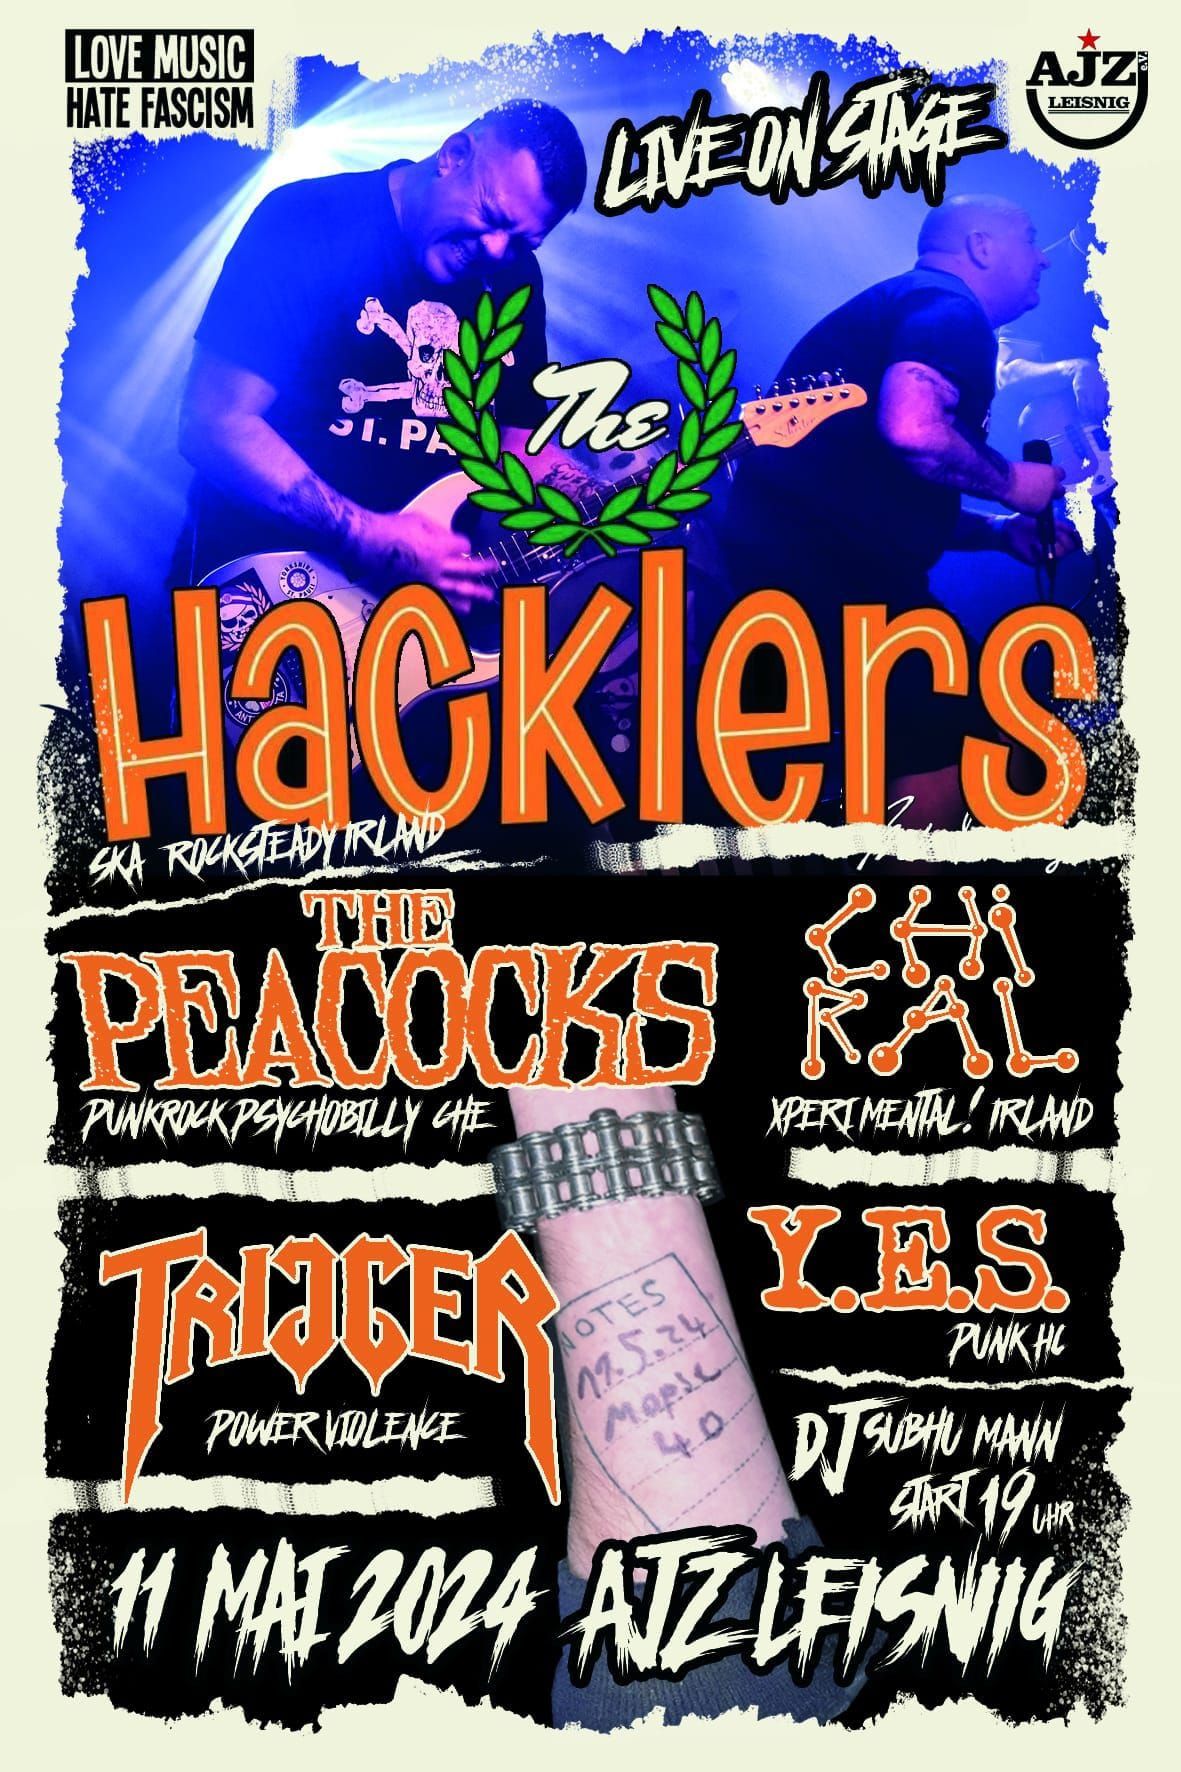 THE HACKLERS, THE PEACOCKS, CHIRAL, TRIGGER, YES +Aftershow DJ SUBHUMANN